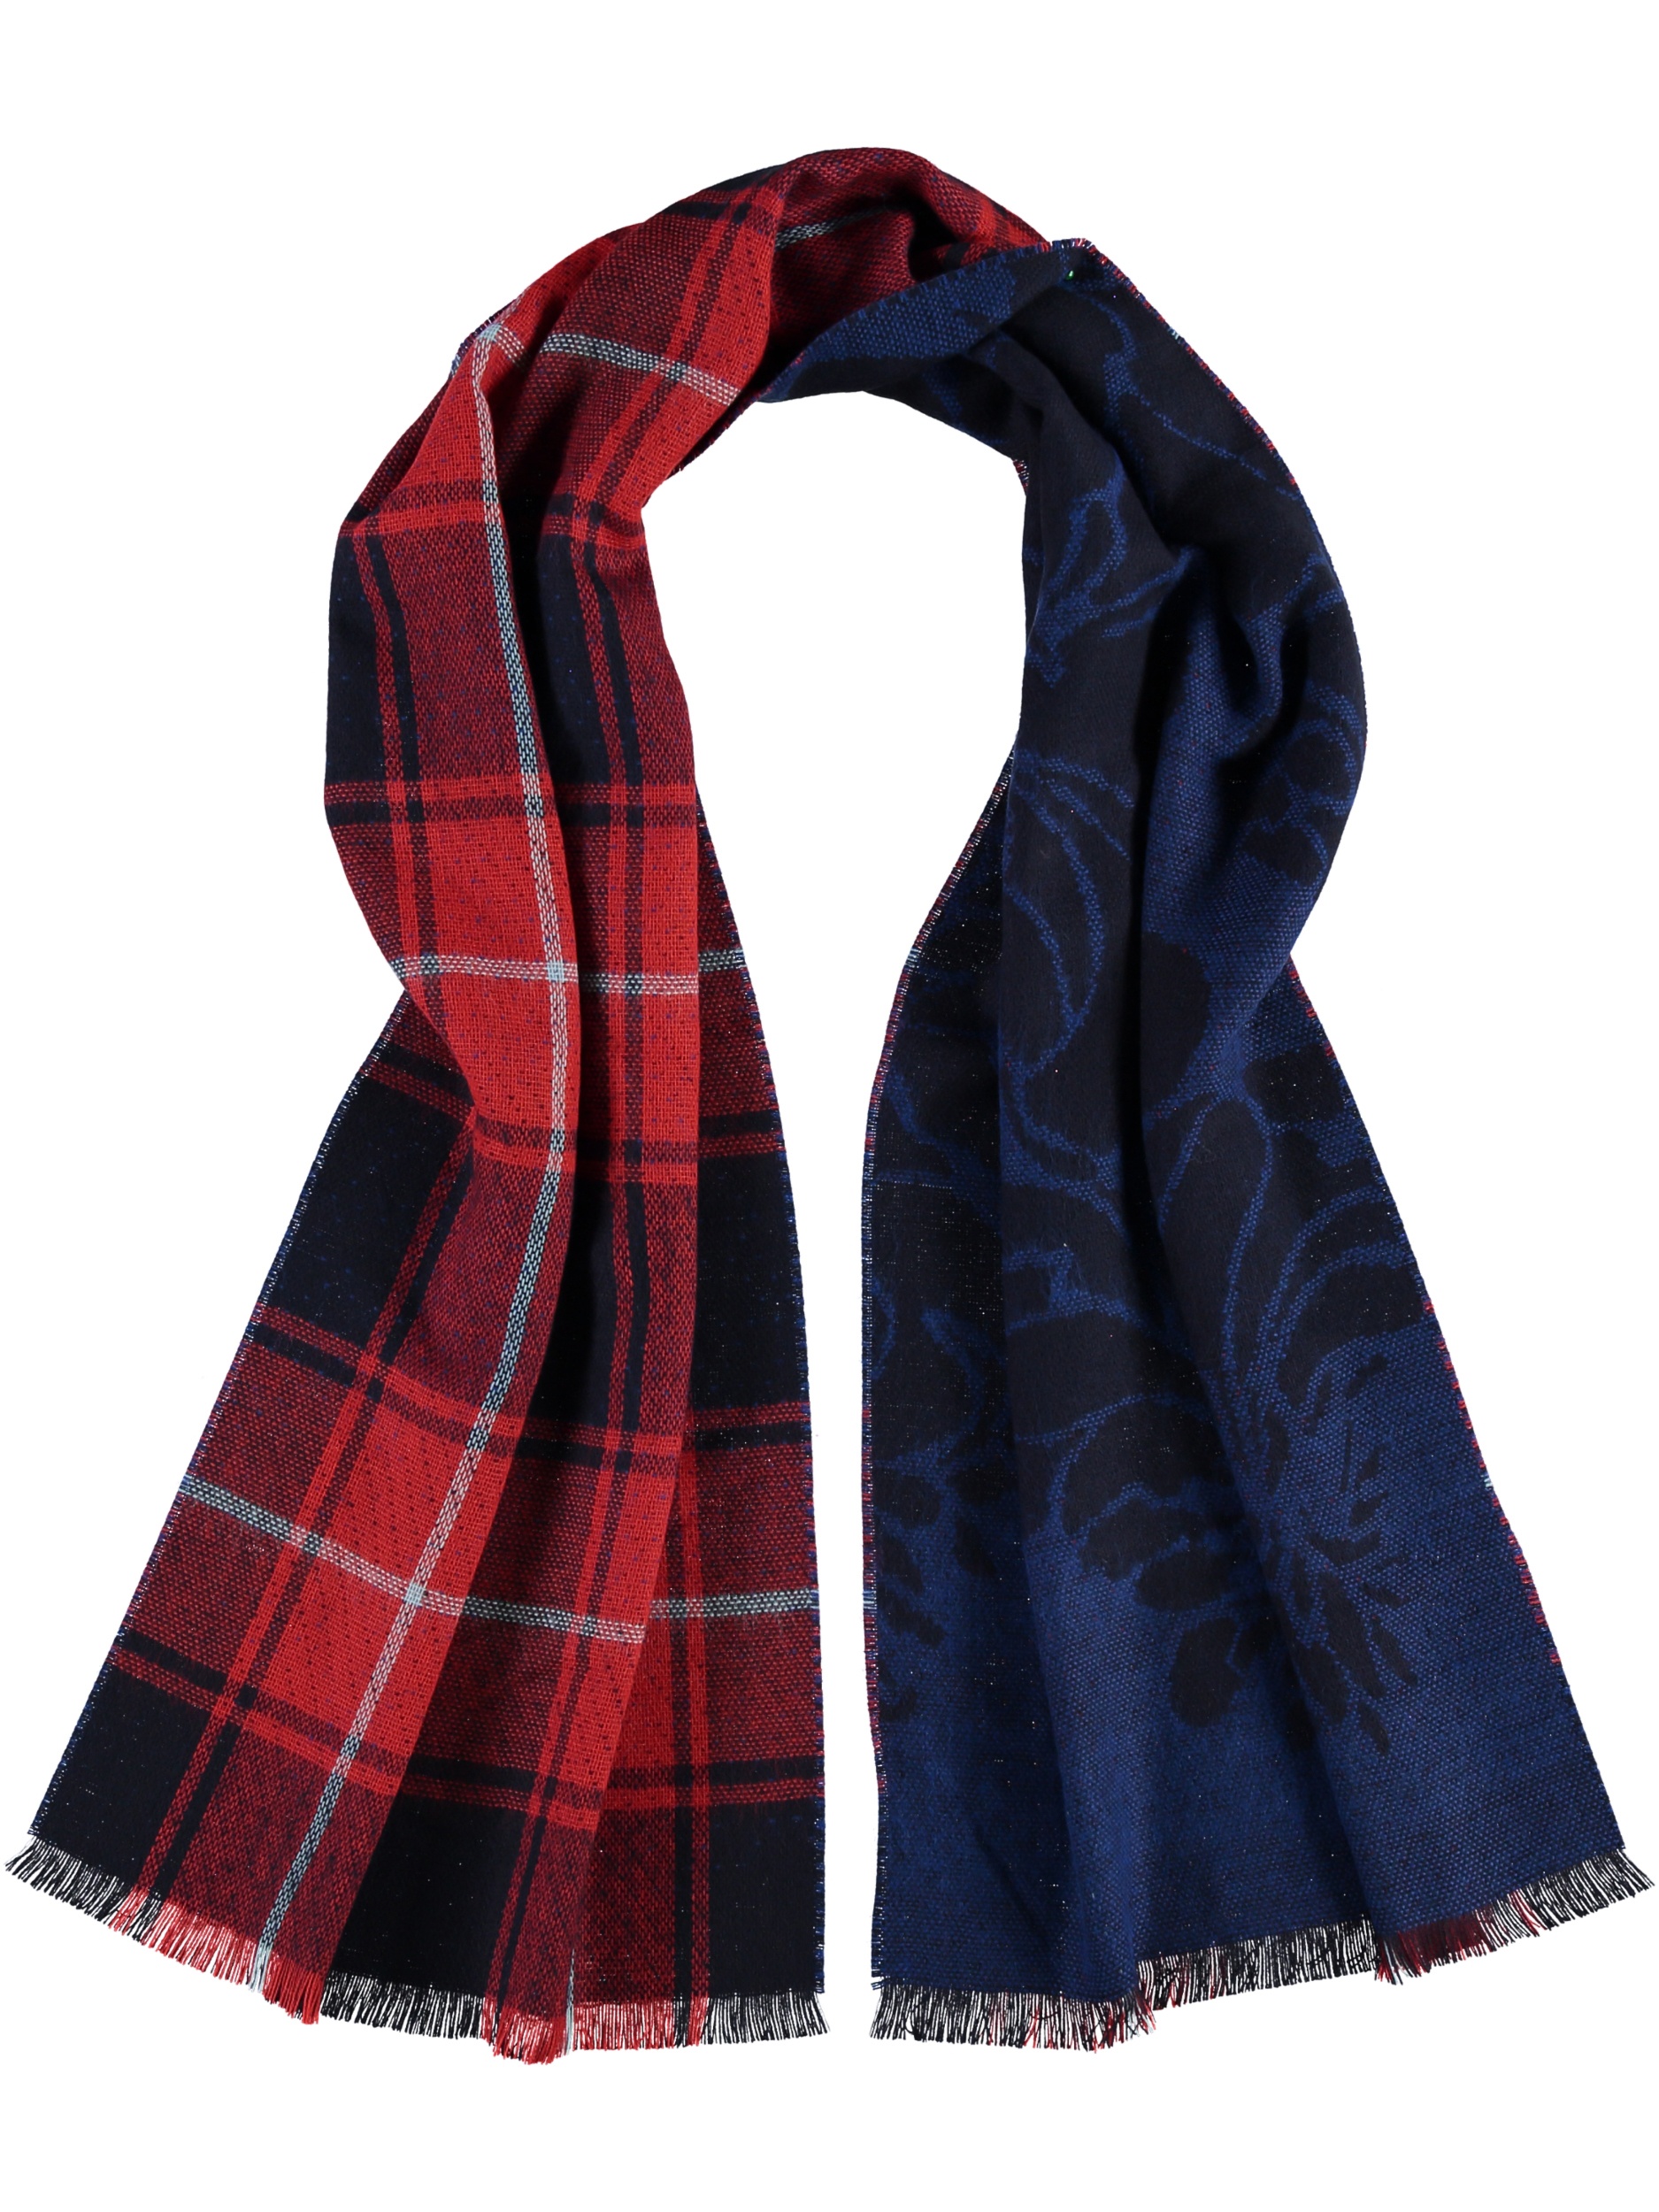 Shawl: Royal Blue & Red Plaid- $26.00
Polyacrylic, Made in Germany
77189200825
Several colour variations available in store